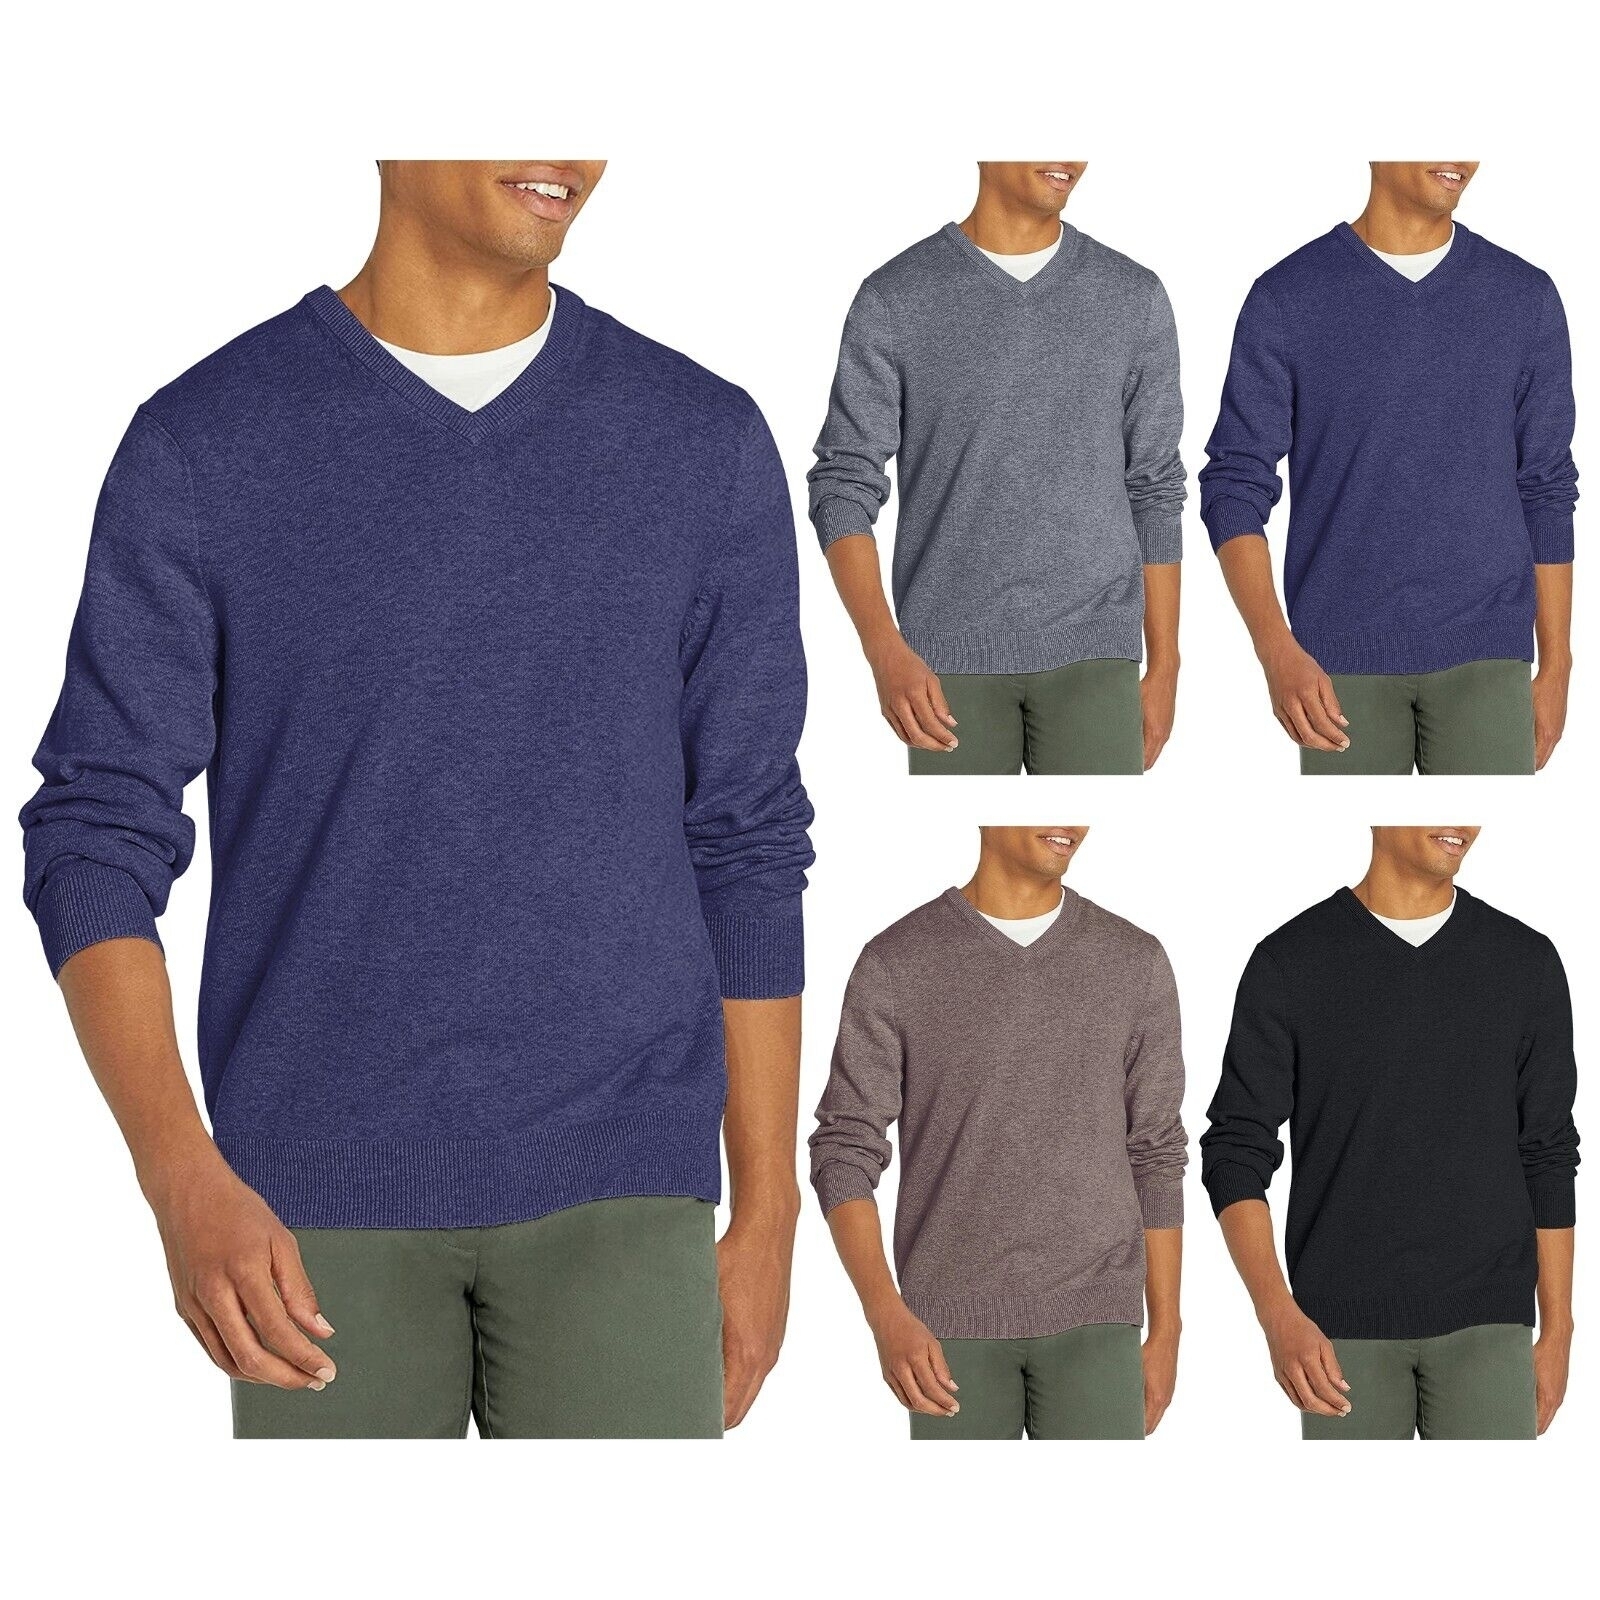 Multi-Pack Mens Cozy Comfy Ultra Soft Slim Fit Warm Knit Pullover V-Neck Sweater - 2, Small